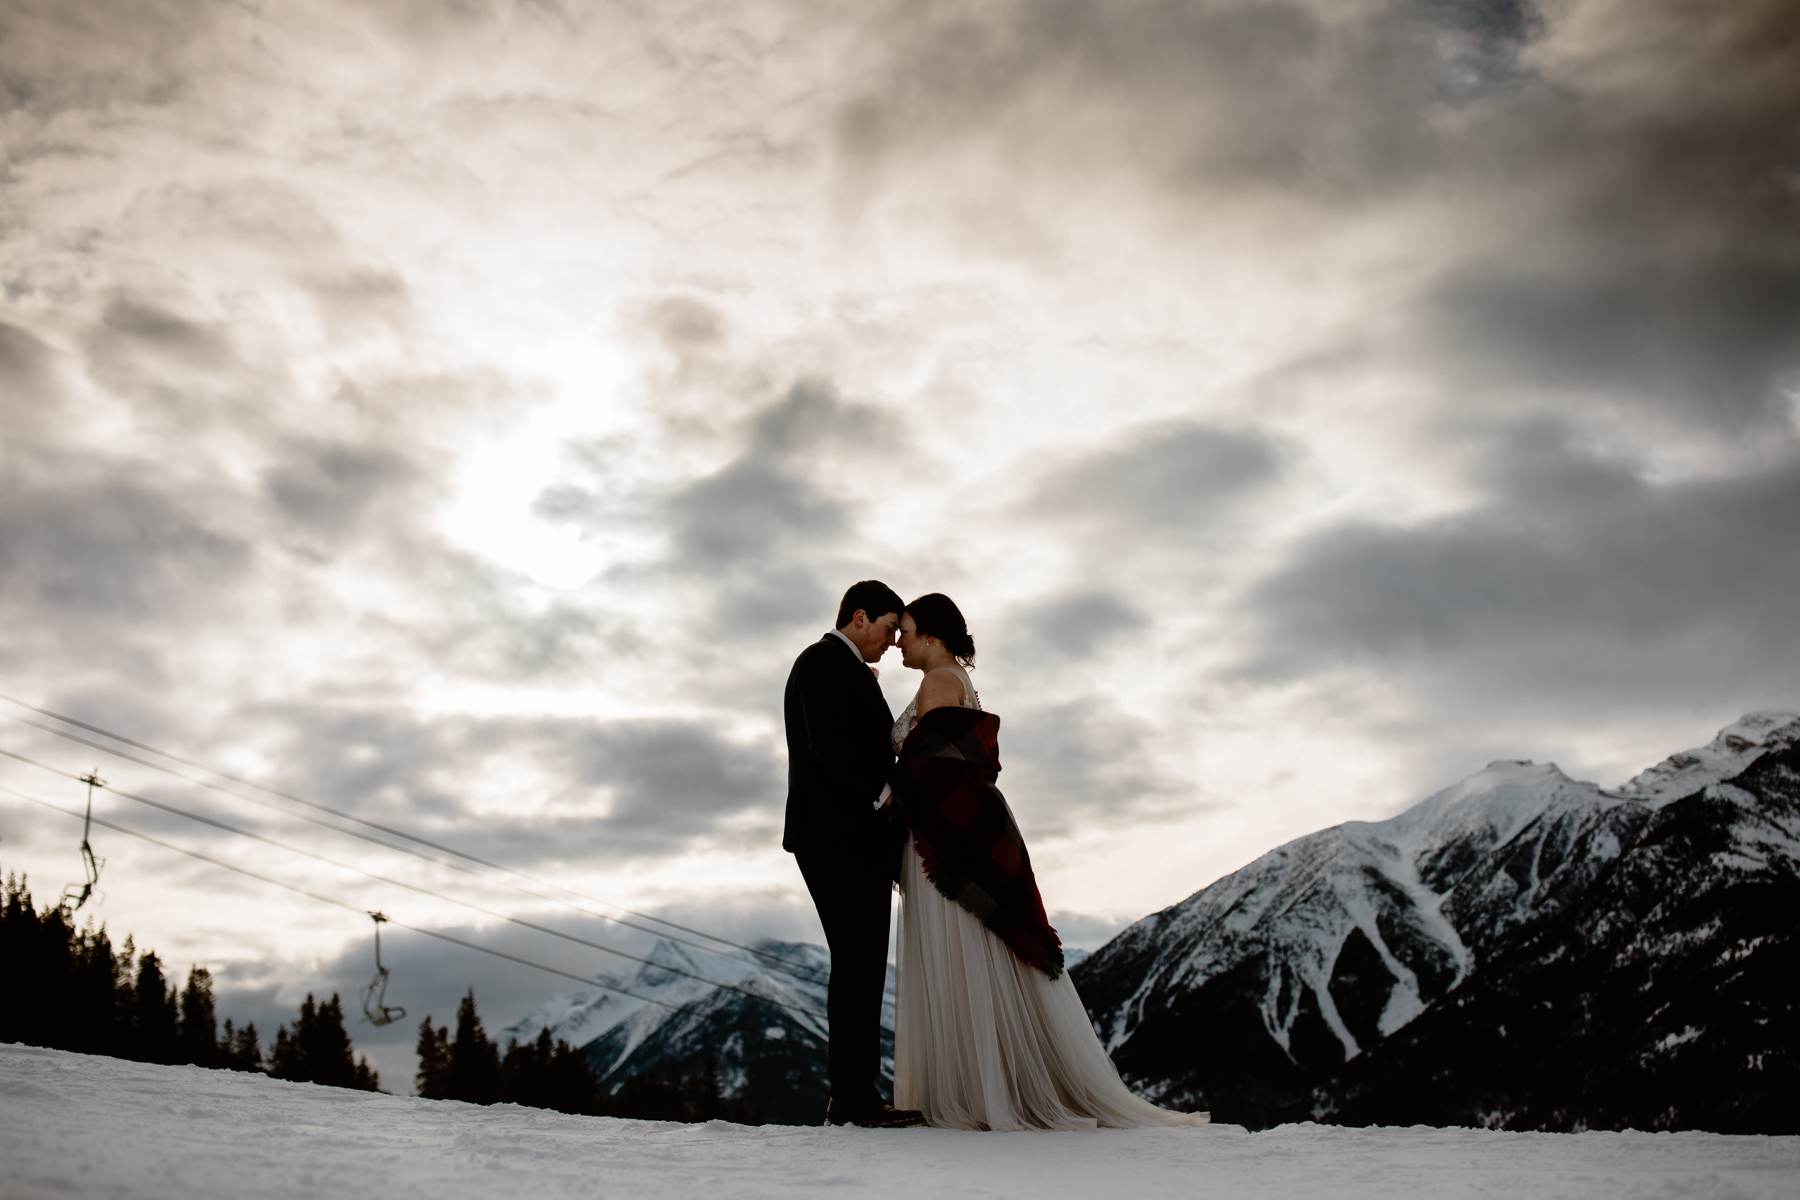 Invermere Wedding Photographers at Eagle Ranch and Panorama Ski Resort - Image 43